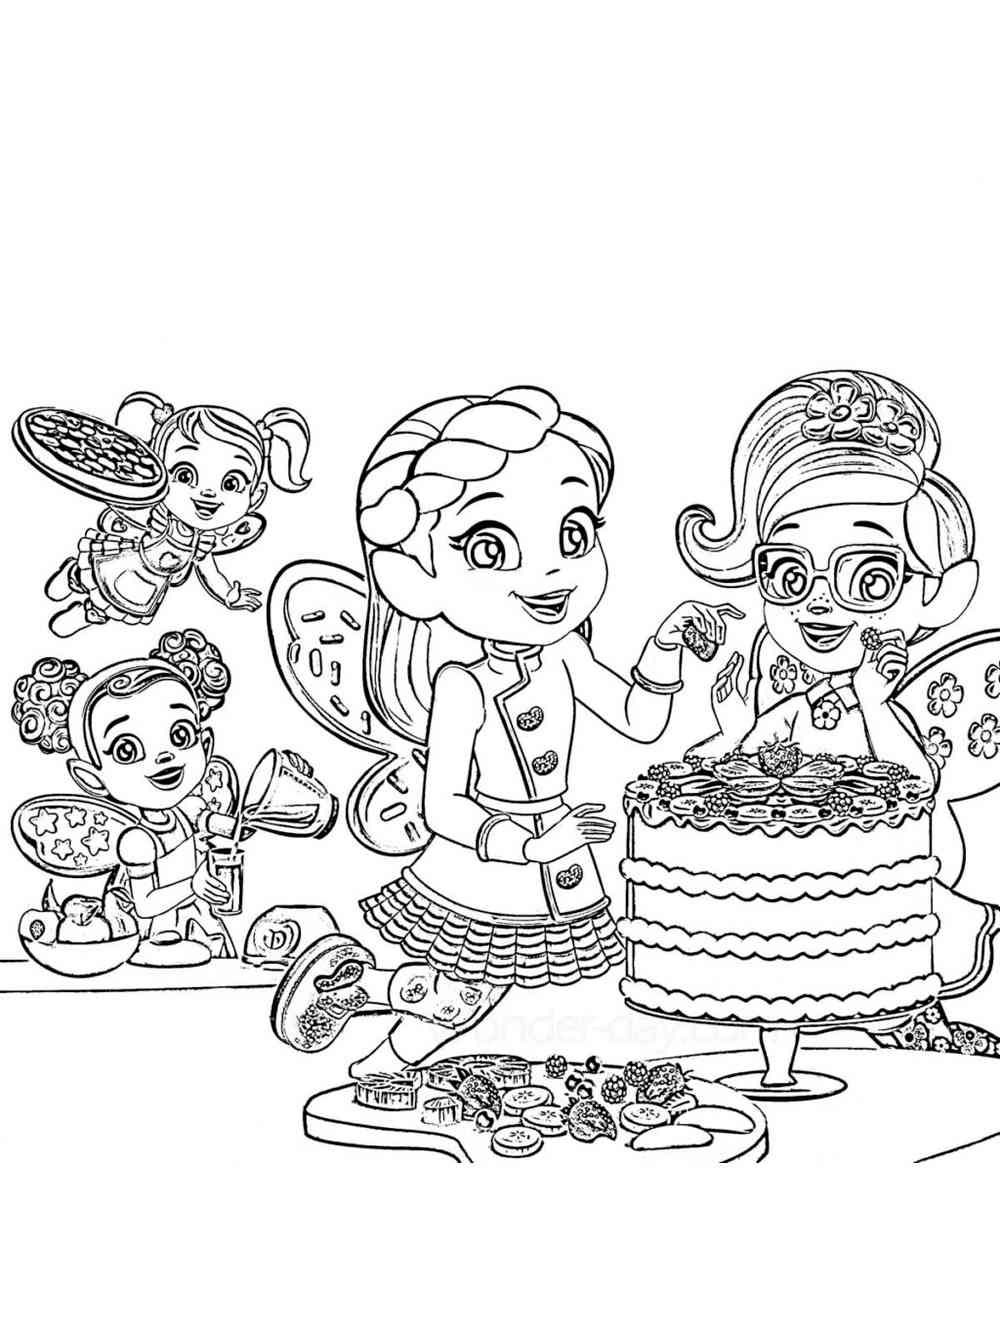 Butterbean’s Cafe 19 coloring page